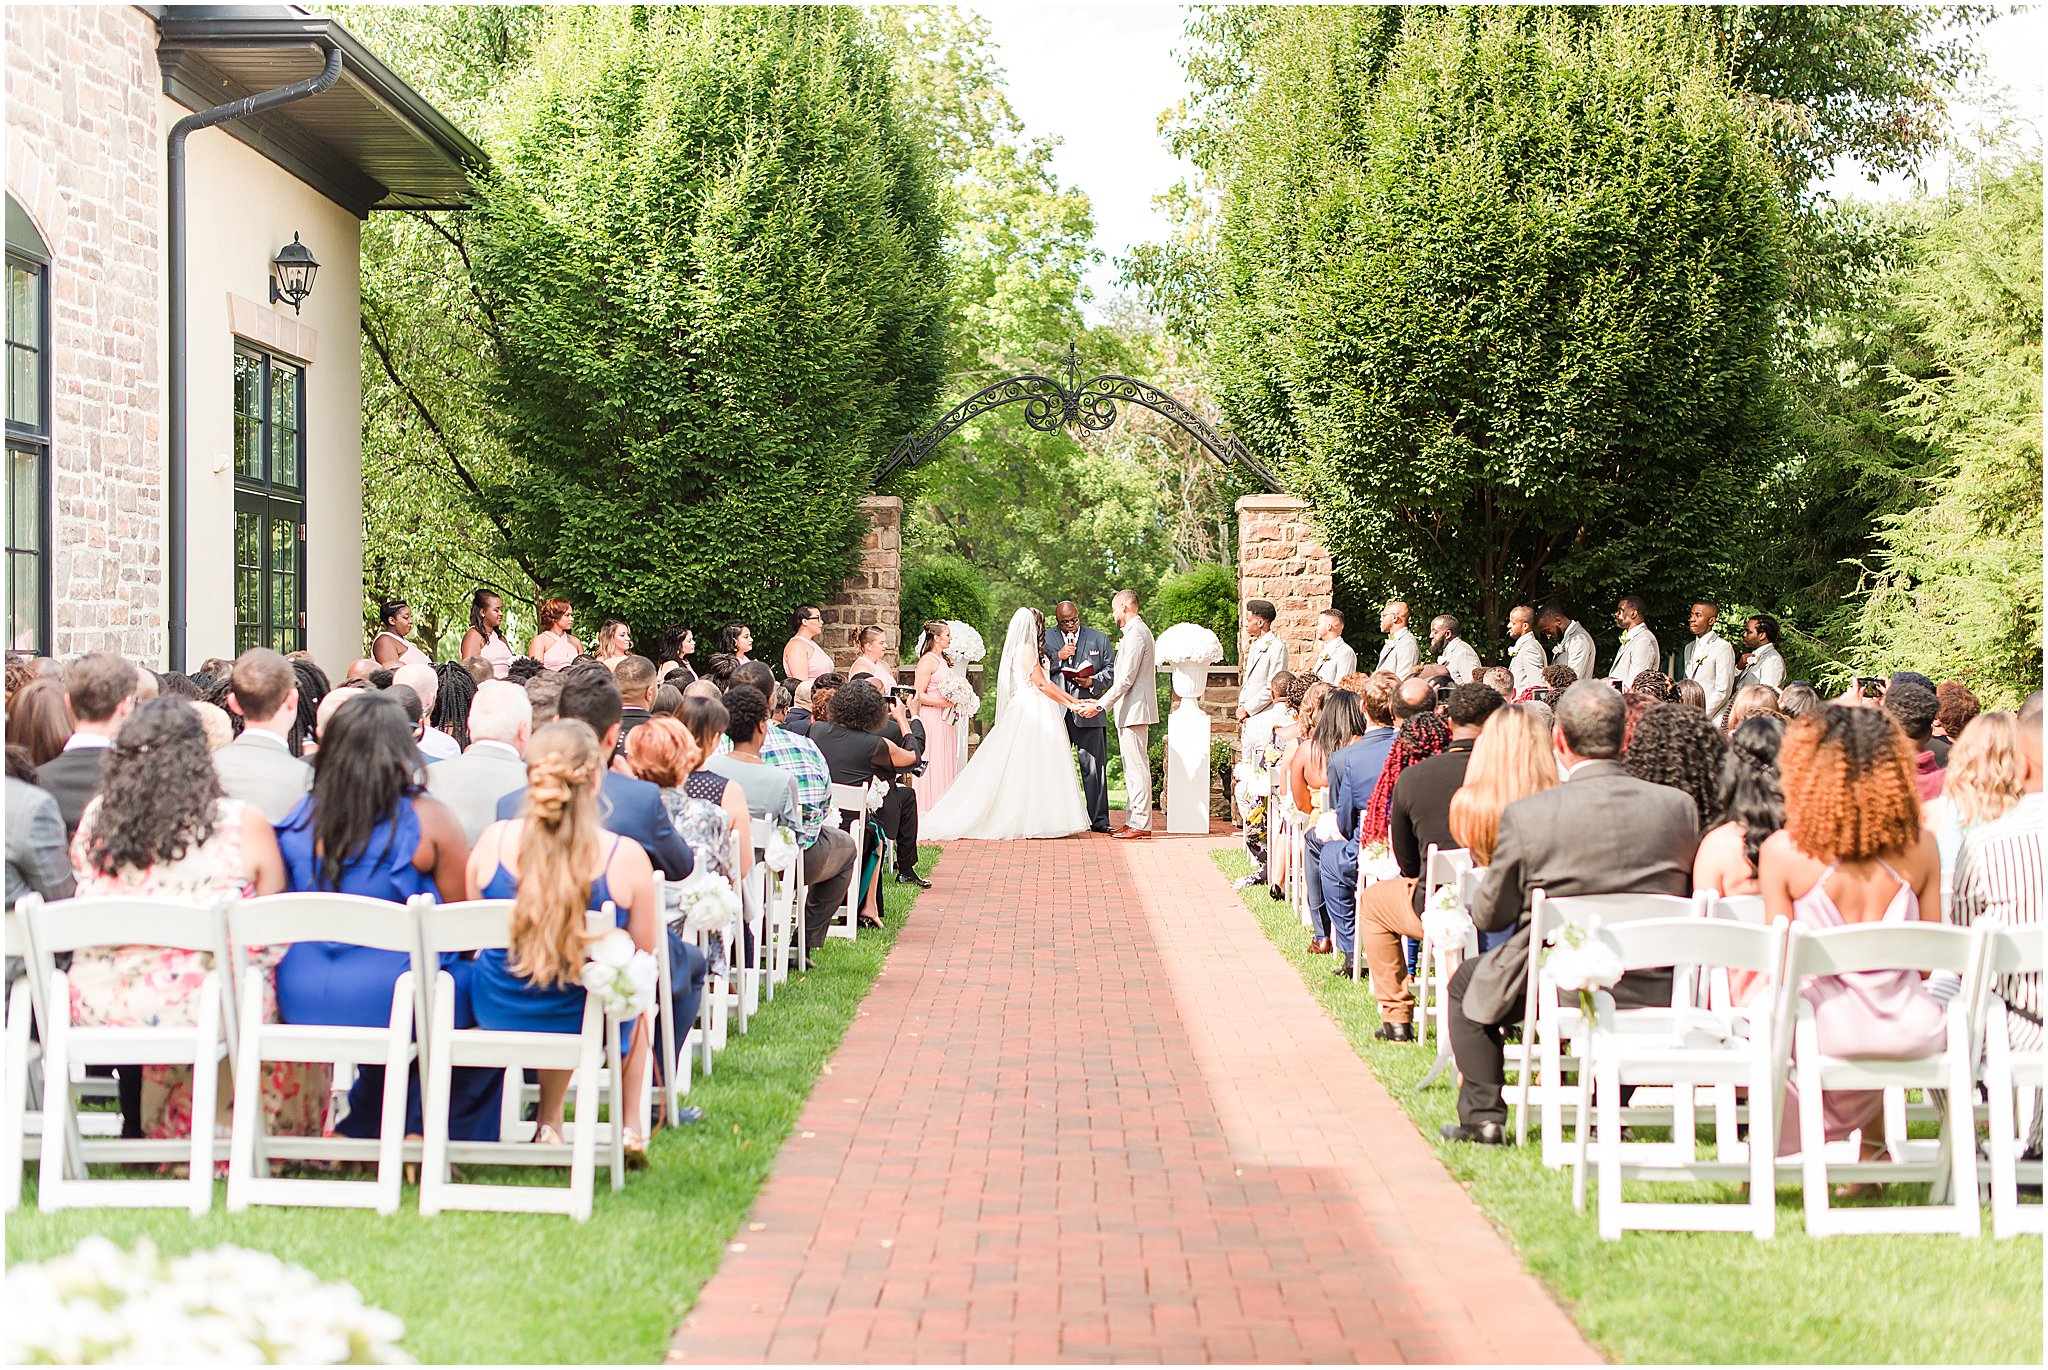 Outdoor ceremony at Pinnacle Golf Club | Courtney Carney Photography